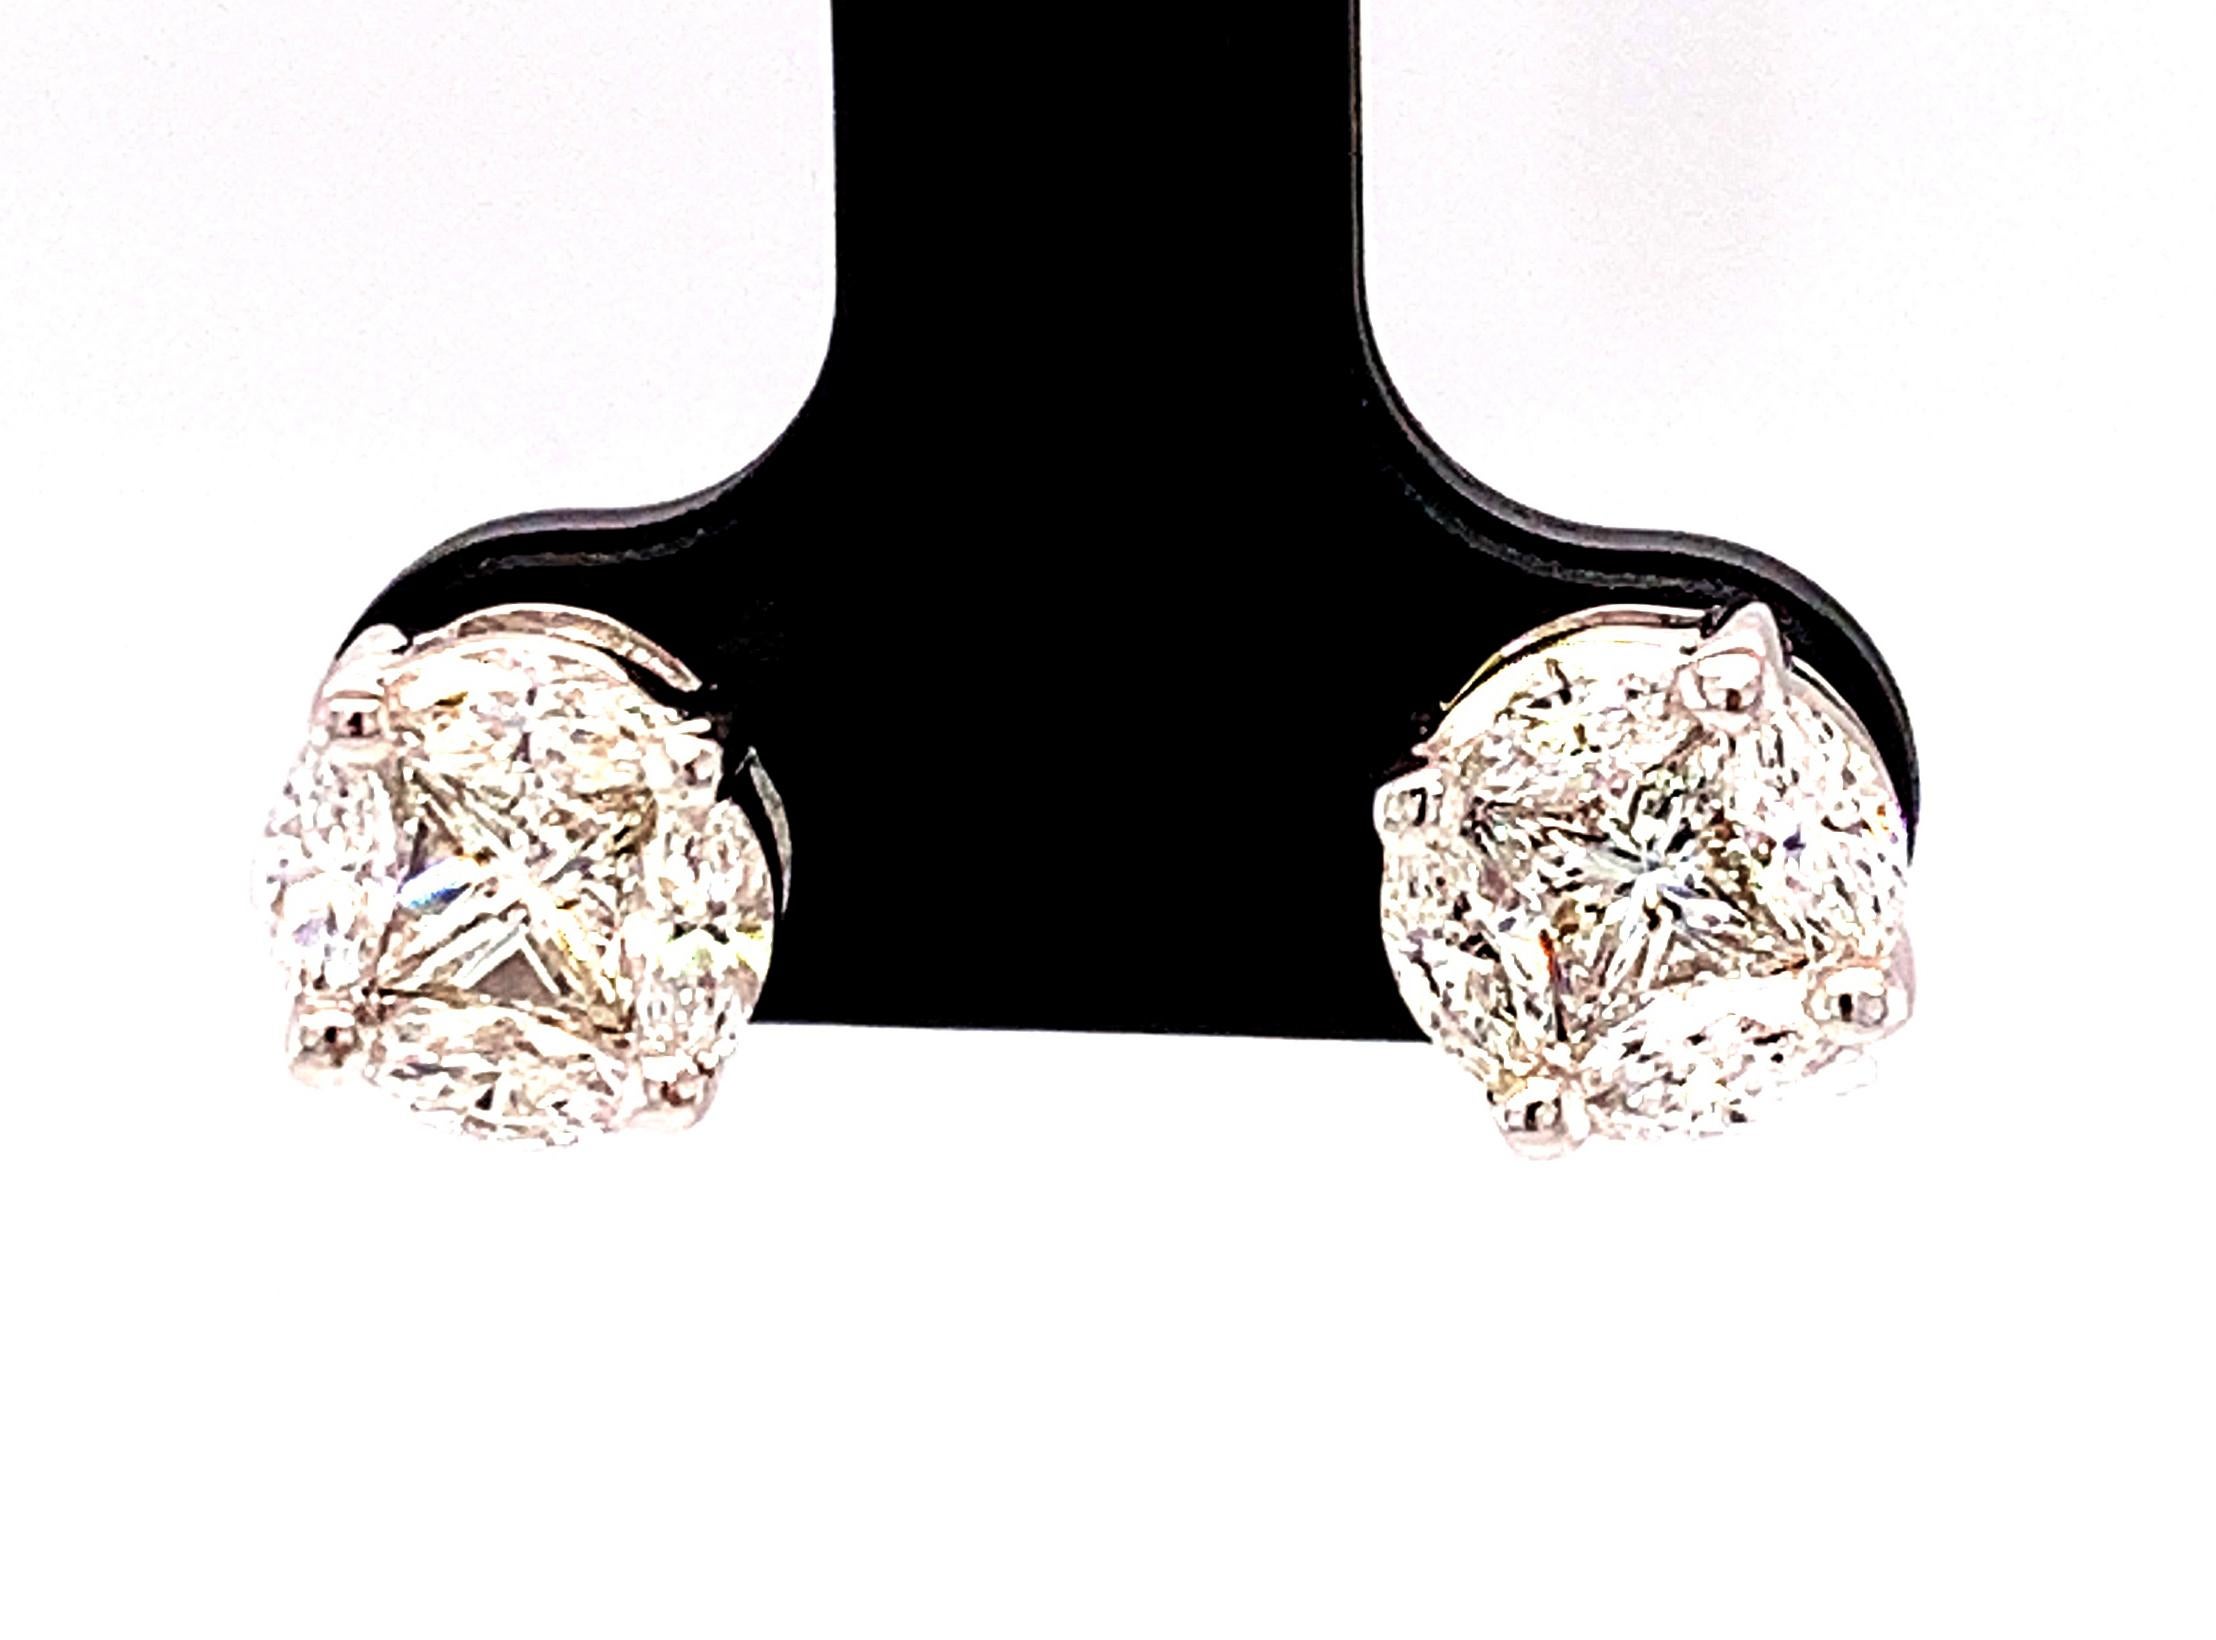 These diamond cluster earrings give the illusion of large, single diamond studs! In fact, each earring is comprised of a single princess cut diamond framed by 4 marquise cut diamonds. While the total carat weight of these diamonds is 1.41 carats,